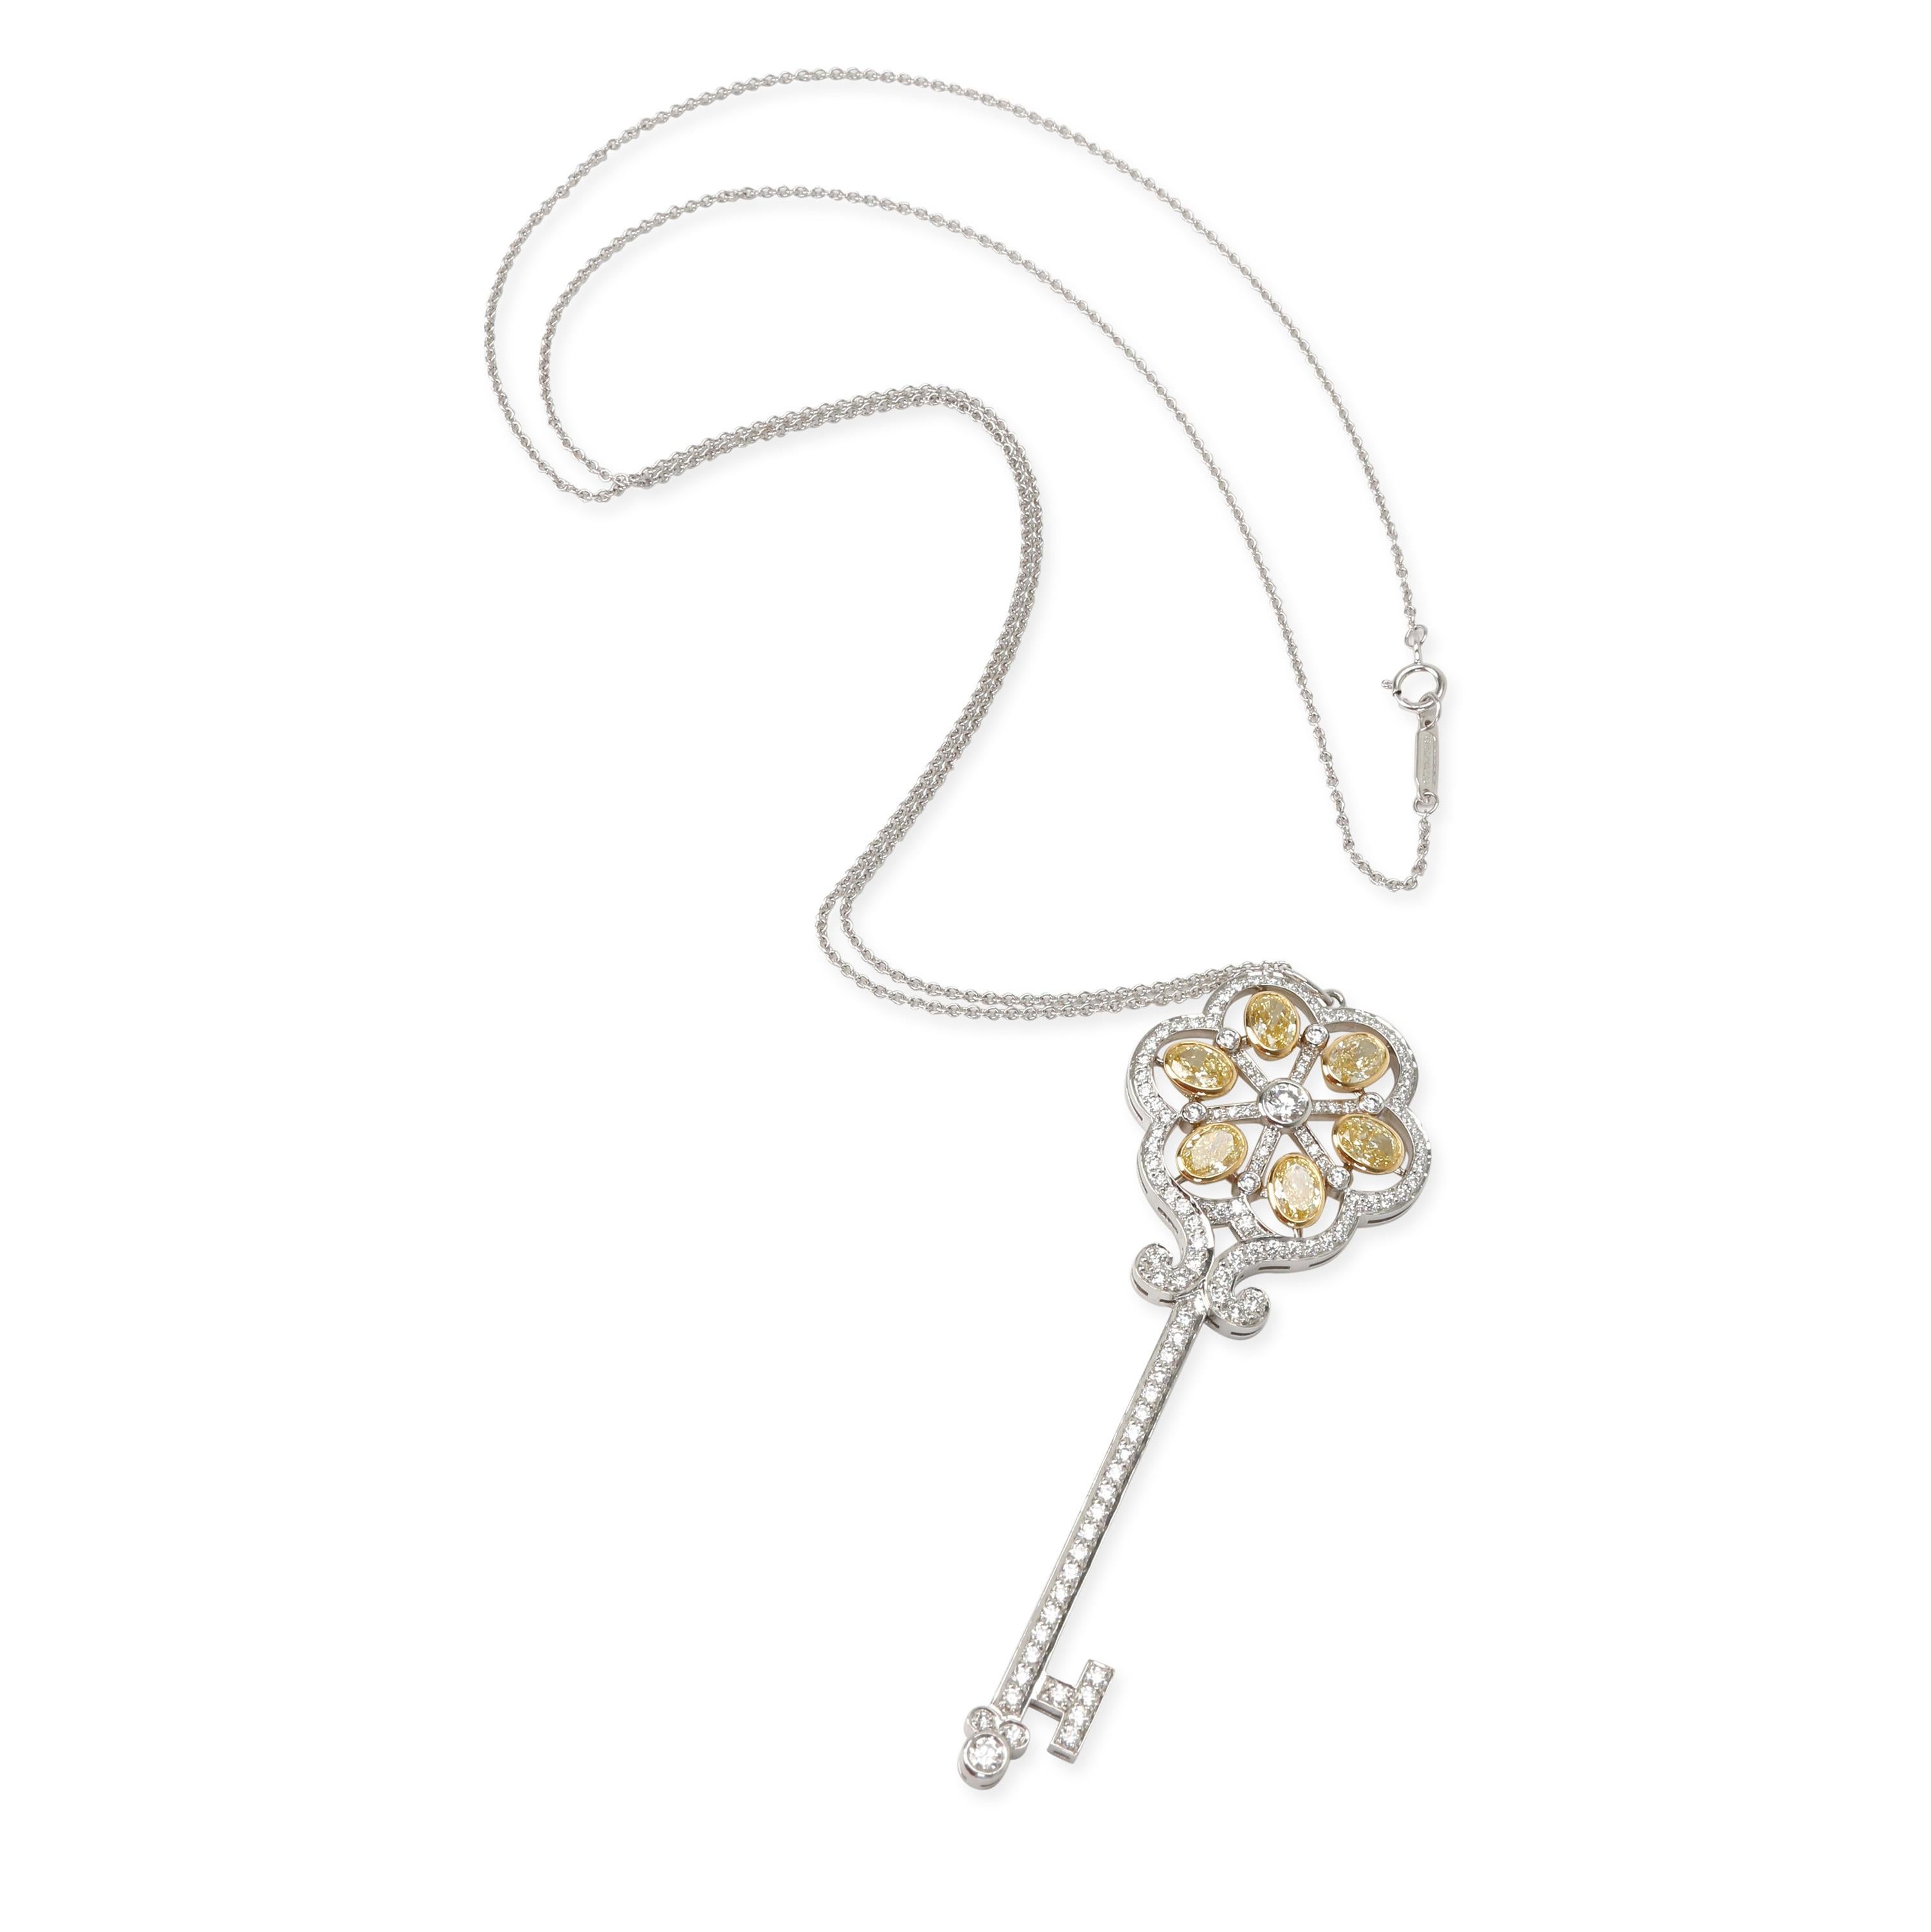 Tiffany & Co. Custom Made Fancy Yellow Diamond Key Pendant in 18KT Gold 4.14 CTW

PRIMARY DETAILS
SKU: 100006

Retails for $74,720. In excellent condition and recently polished. Chain is 24 inches in length. Comes with the original box.

Brand: